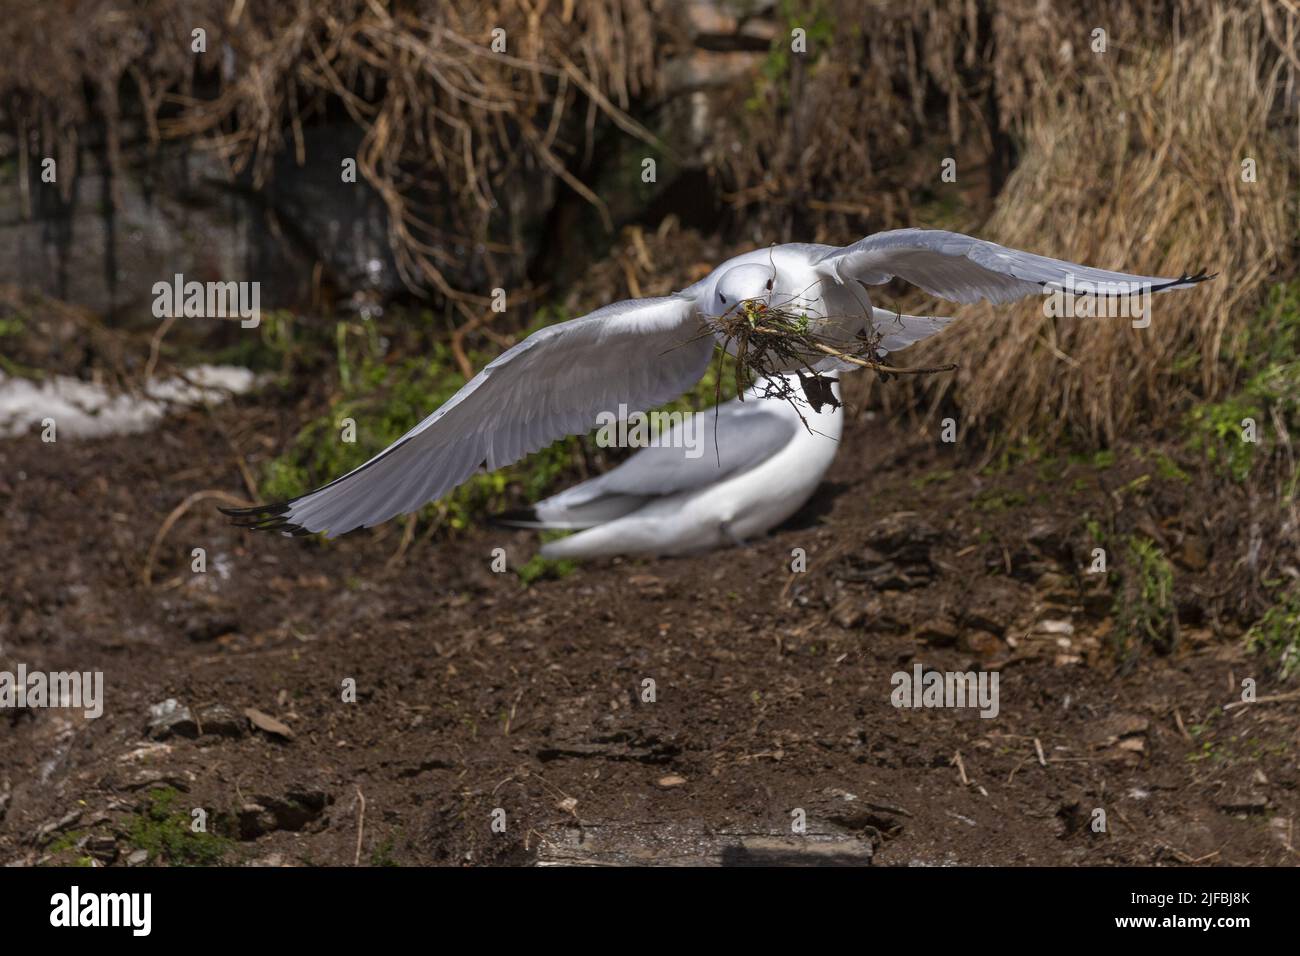 Norway, Varanger Fjord, Vadso, Ekkeroy protected area with important seabird colonies including a large breeding colony of black-legged kittiwakes or black-legged kittiwake (Rissa tridactyla) on a cliff, fight in flight Stock Photo